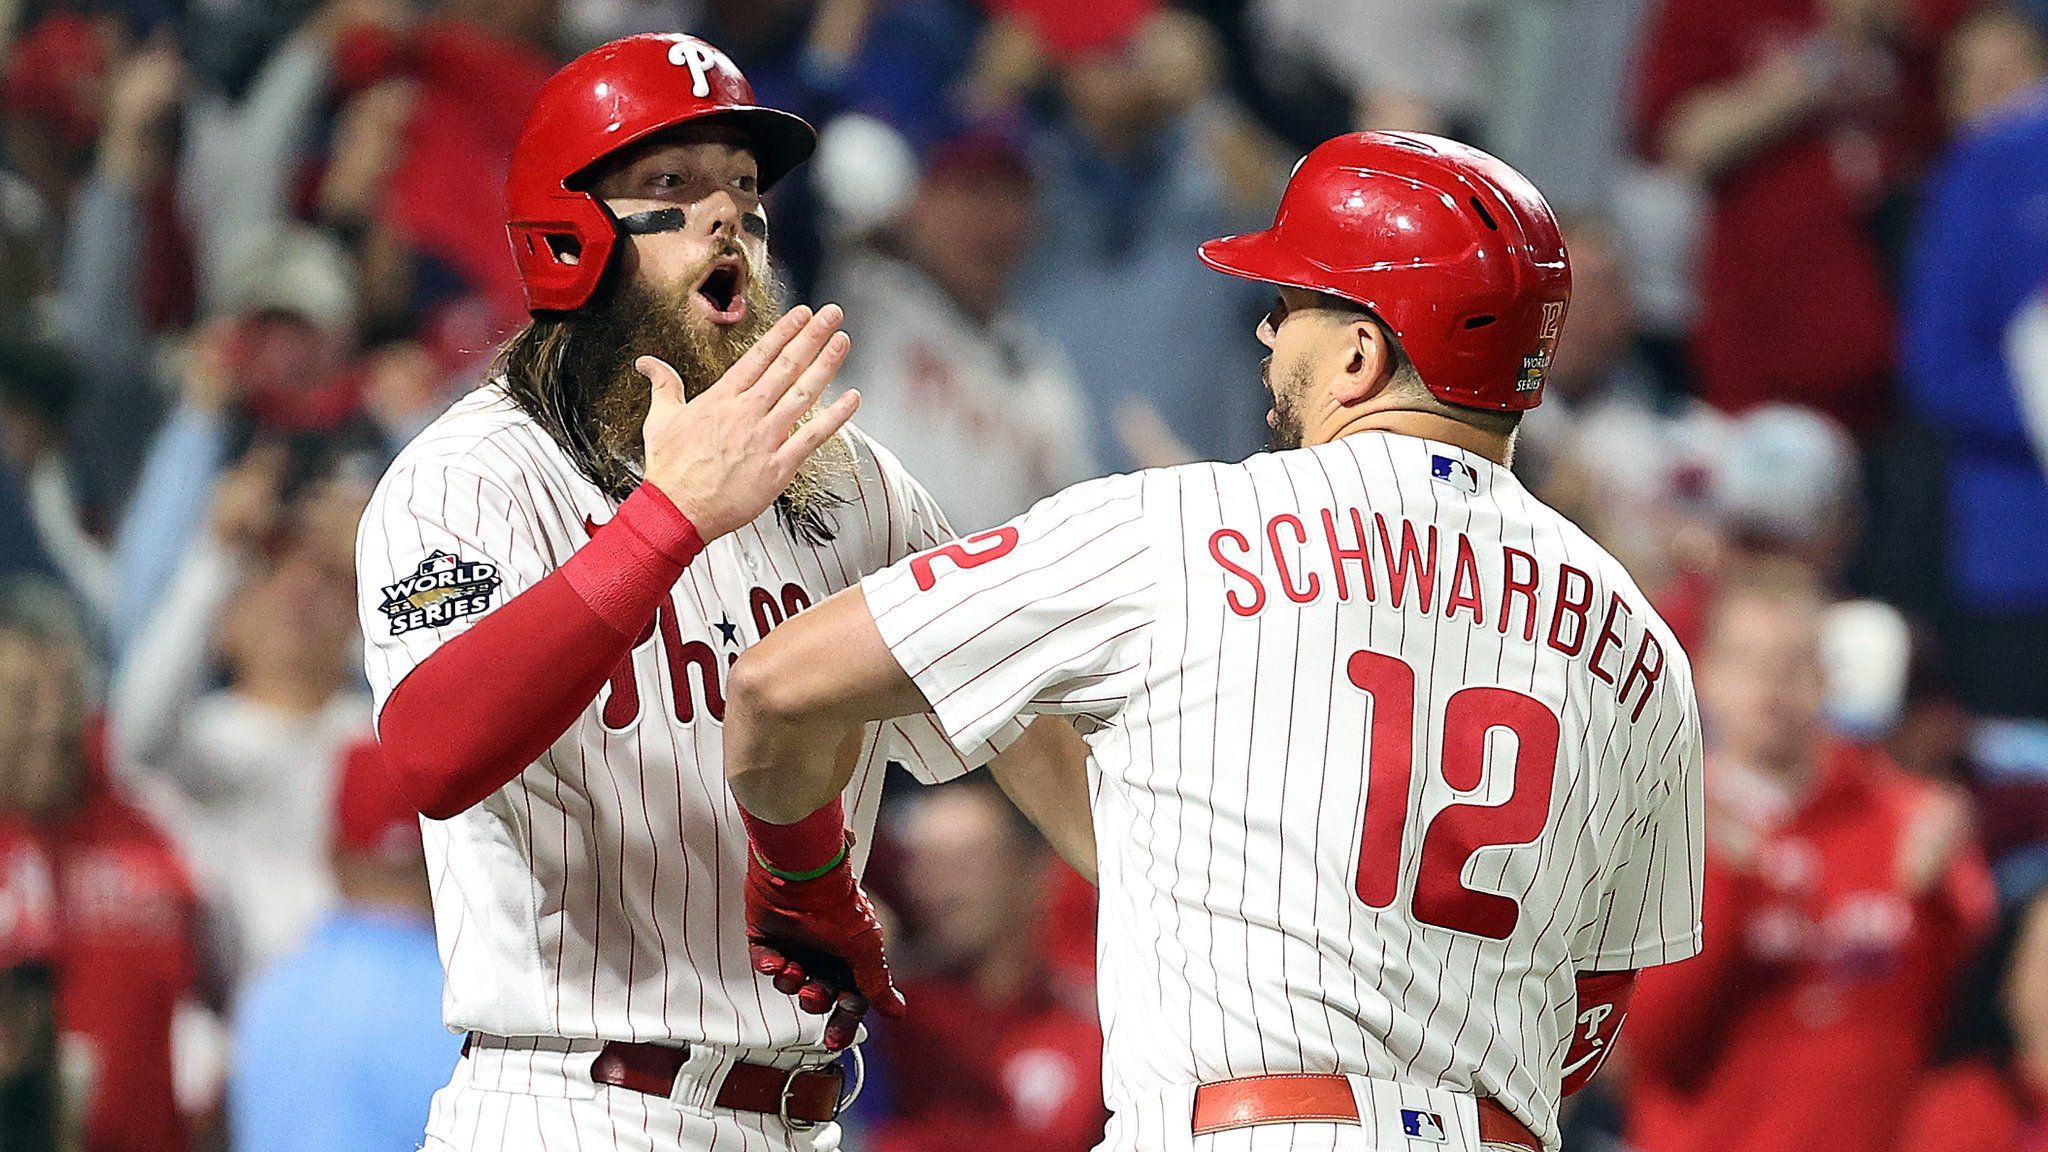 For a redemption story, look to the Phillies, not the Astros